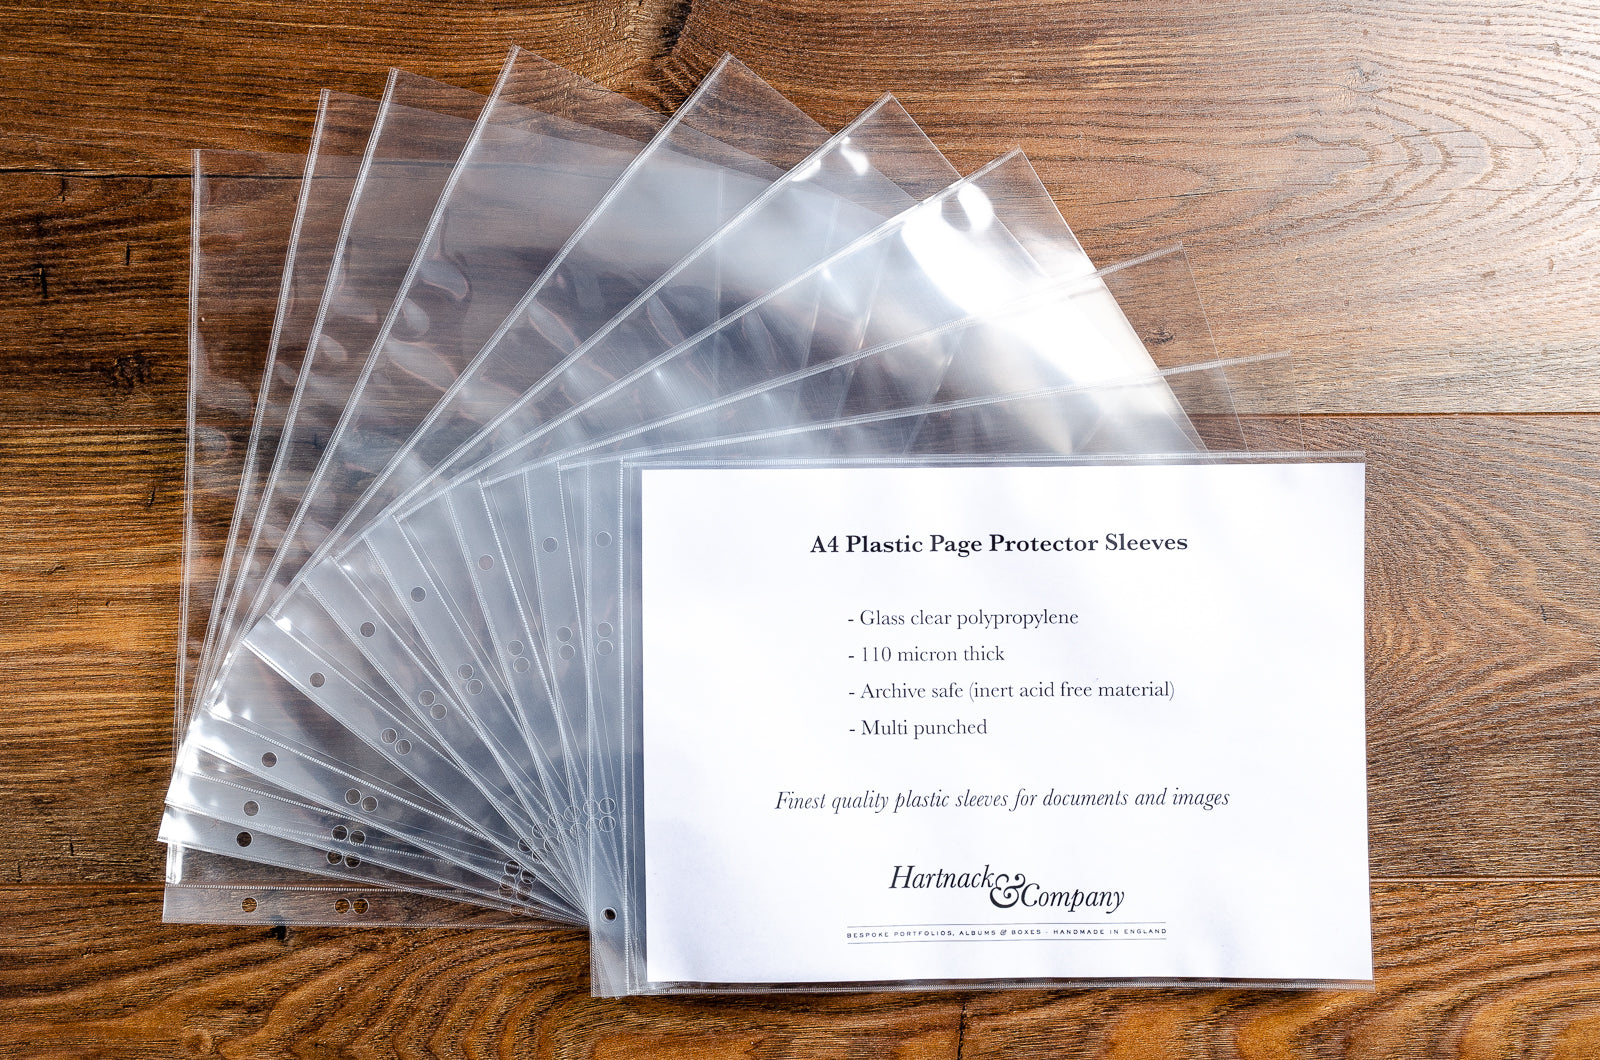 High quality and clarity page protectors sleeves A4 landscape multi punched